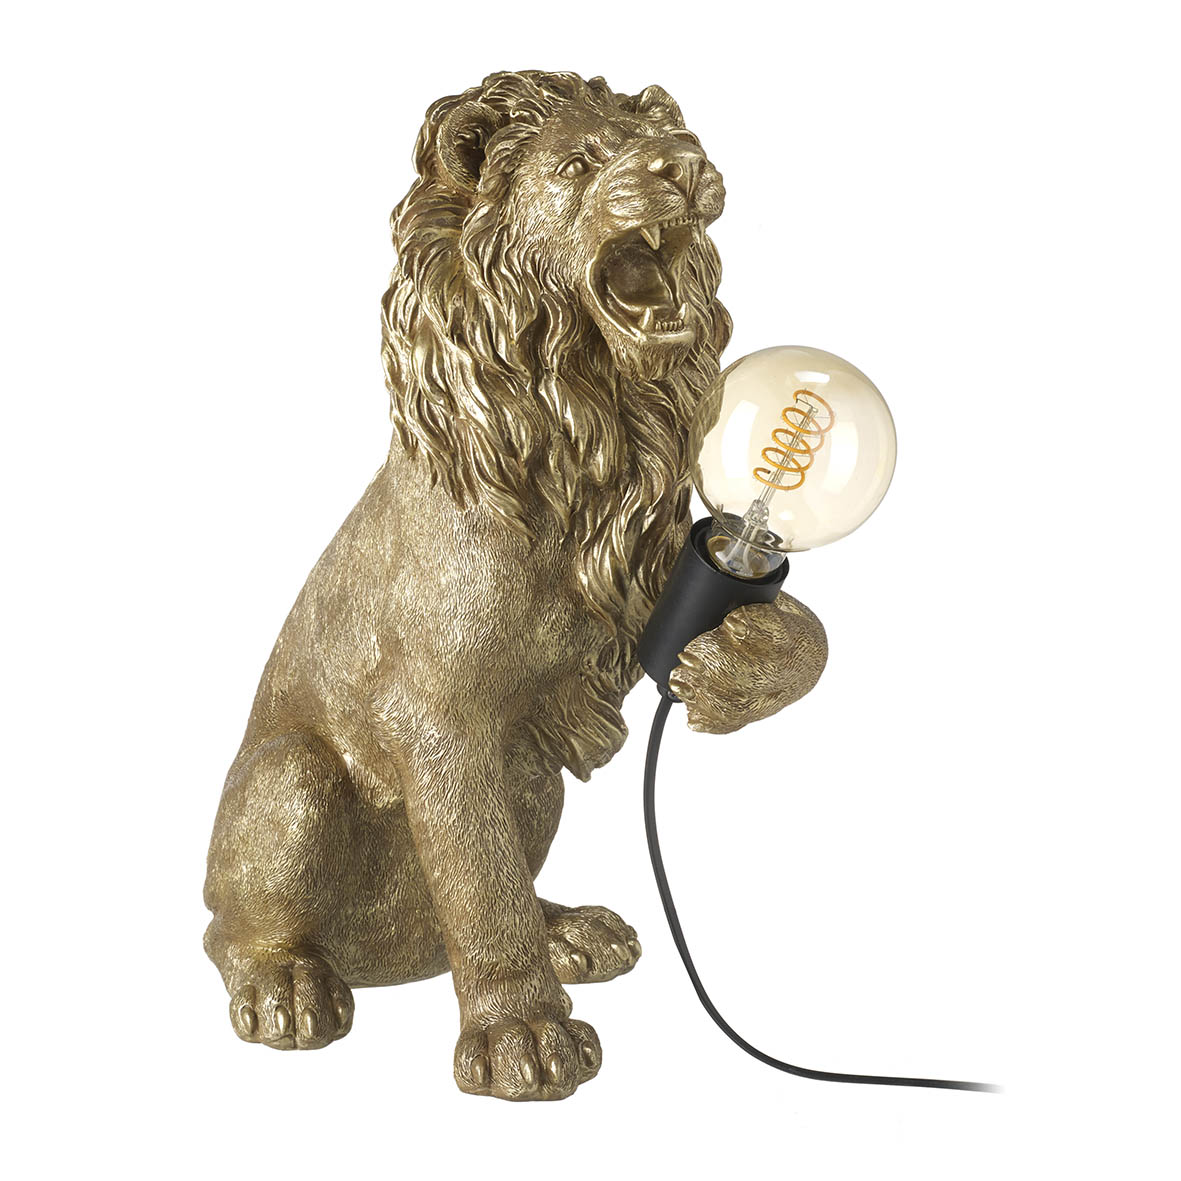   Lion Table Lamp Gold